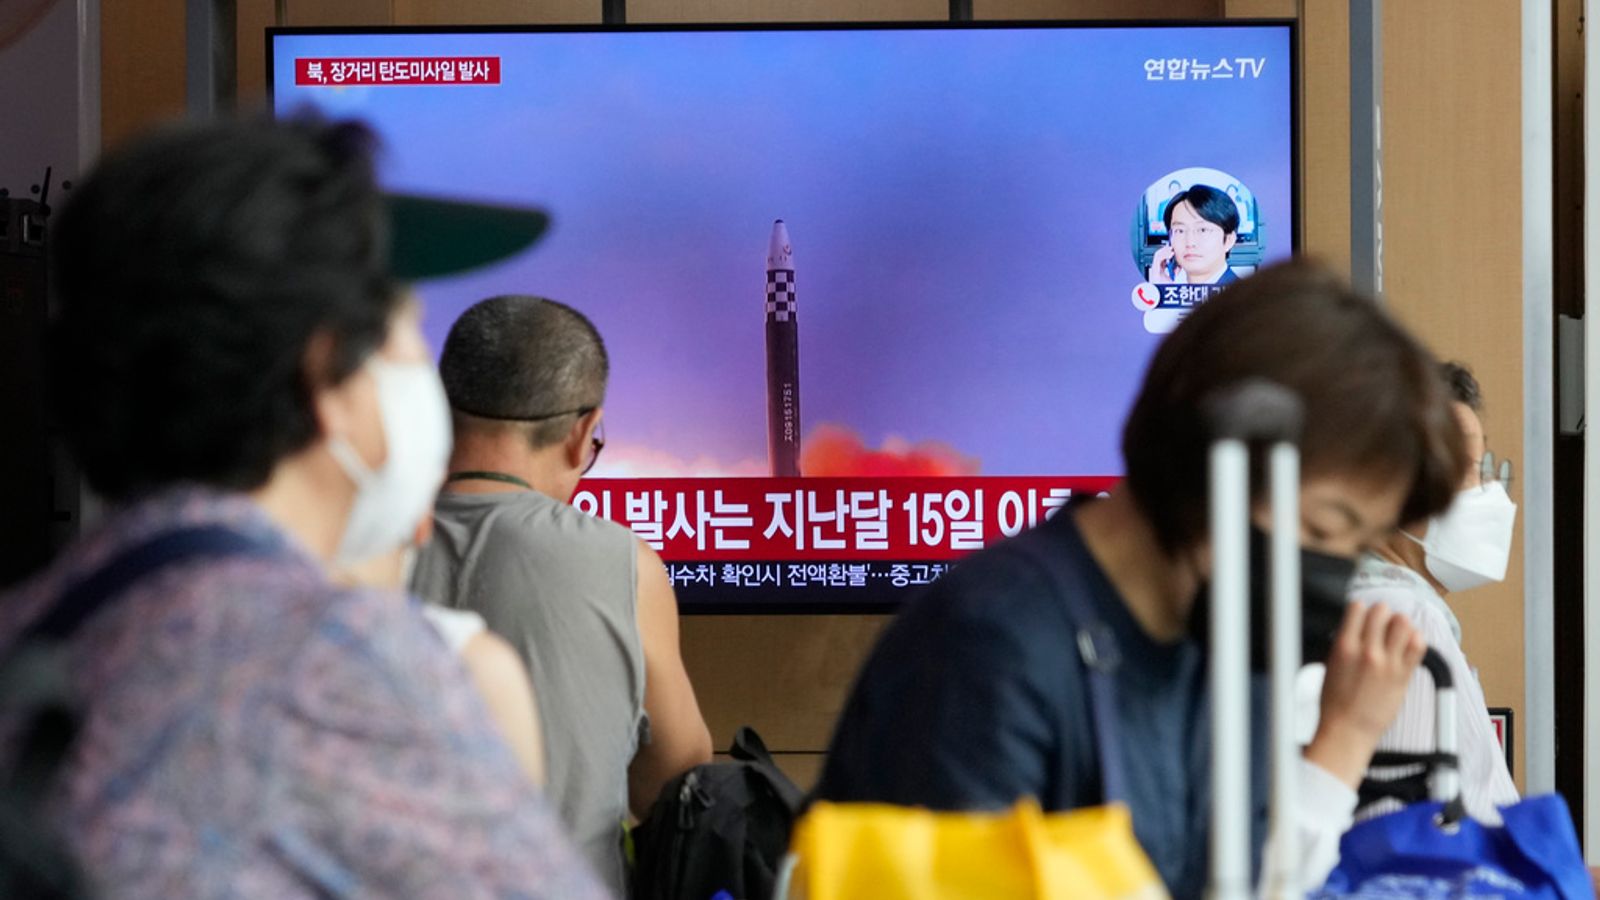 North Korean missile flies for 74 minutes - its longest-ever flight time